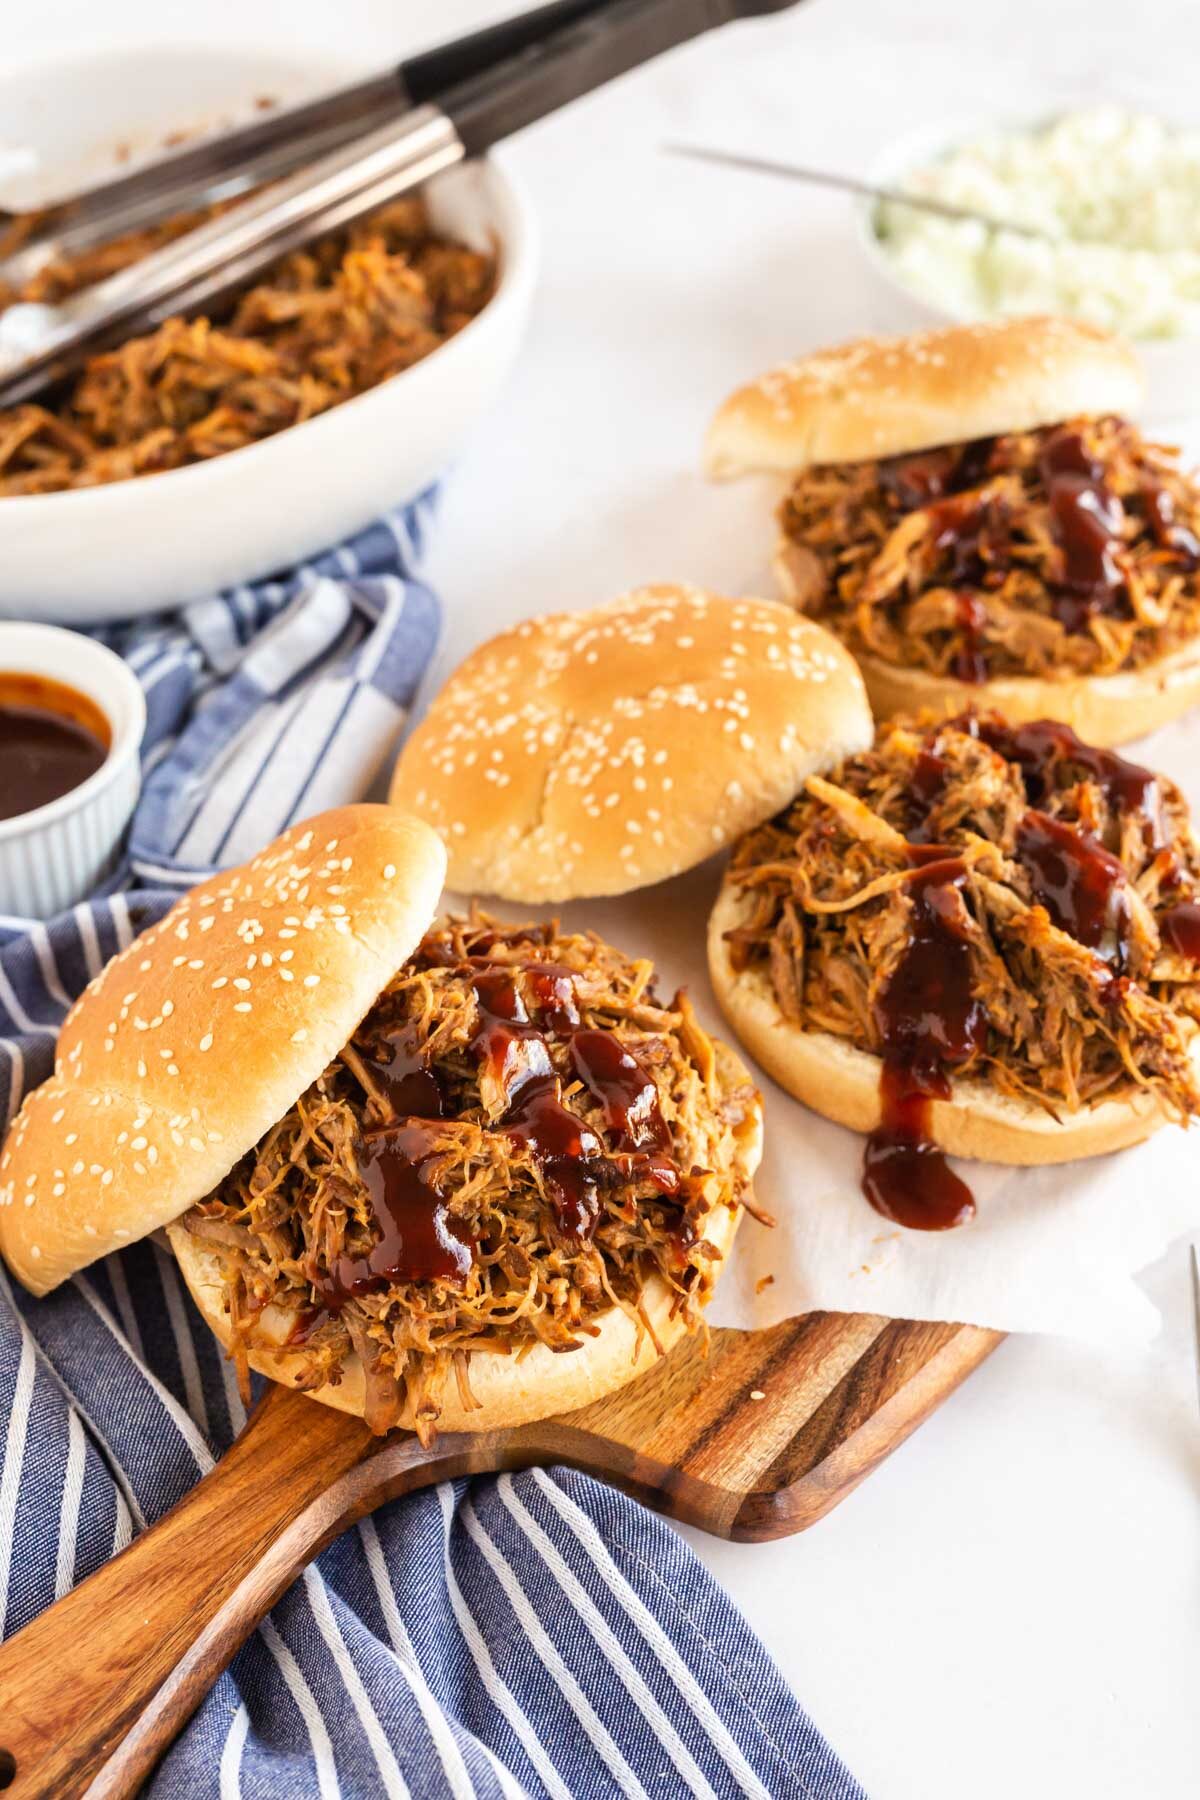 3 pulled pork sandwiches in sesame buns